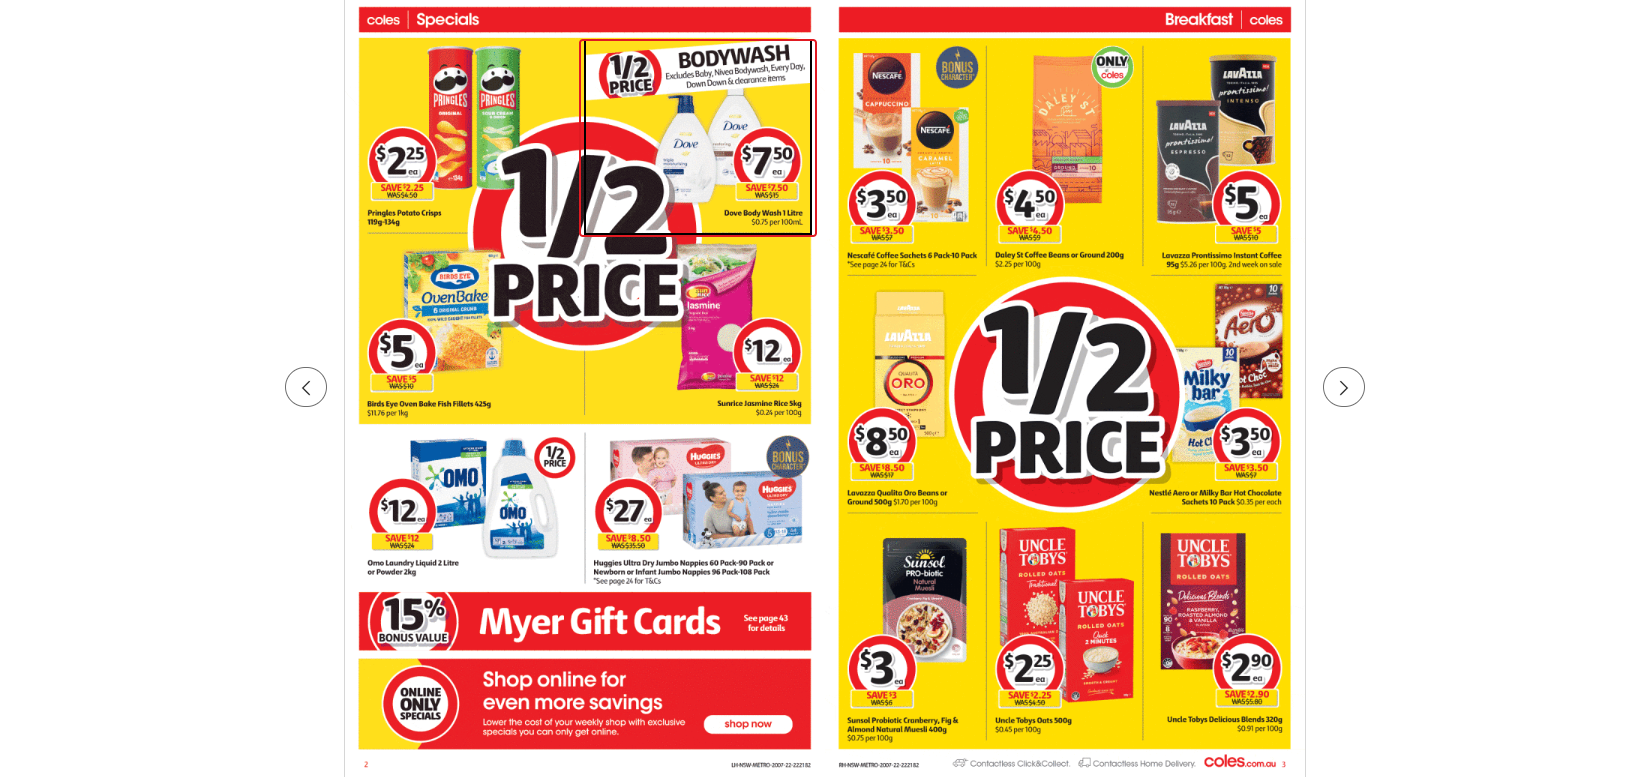 Coles this week's catalogue up to 50% OFF on groceries, beauty&everyday essentials(until 2nd Aug)